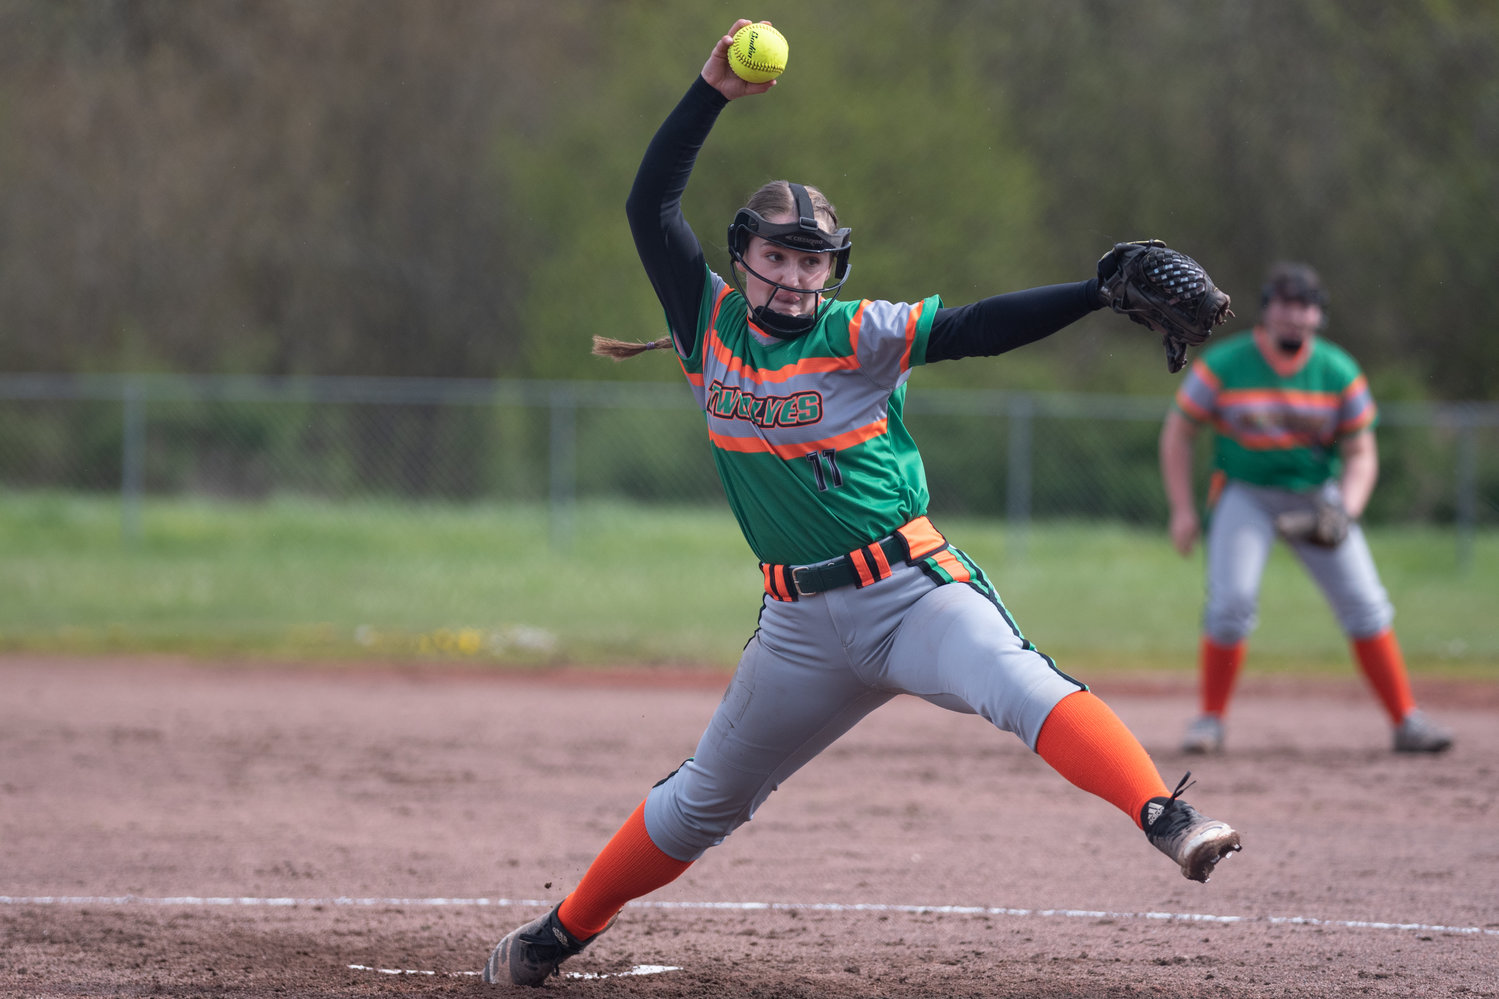 Morton-White Pass pitcher Emarey Hampton winds up to deliver against Toledo April 22 at the Toledo Softball Fields.